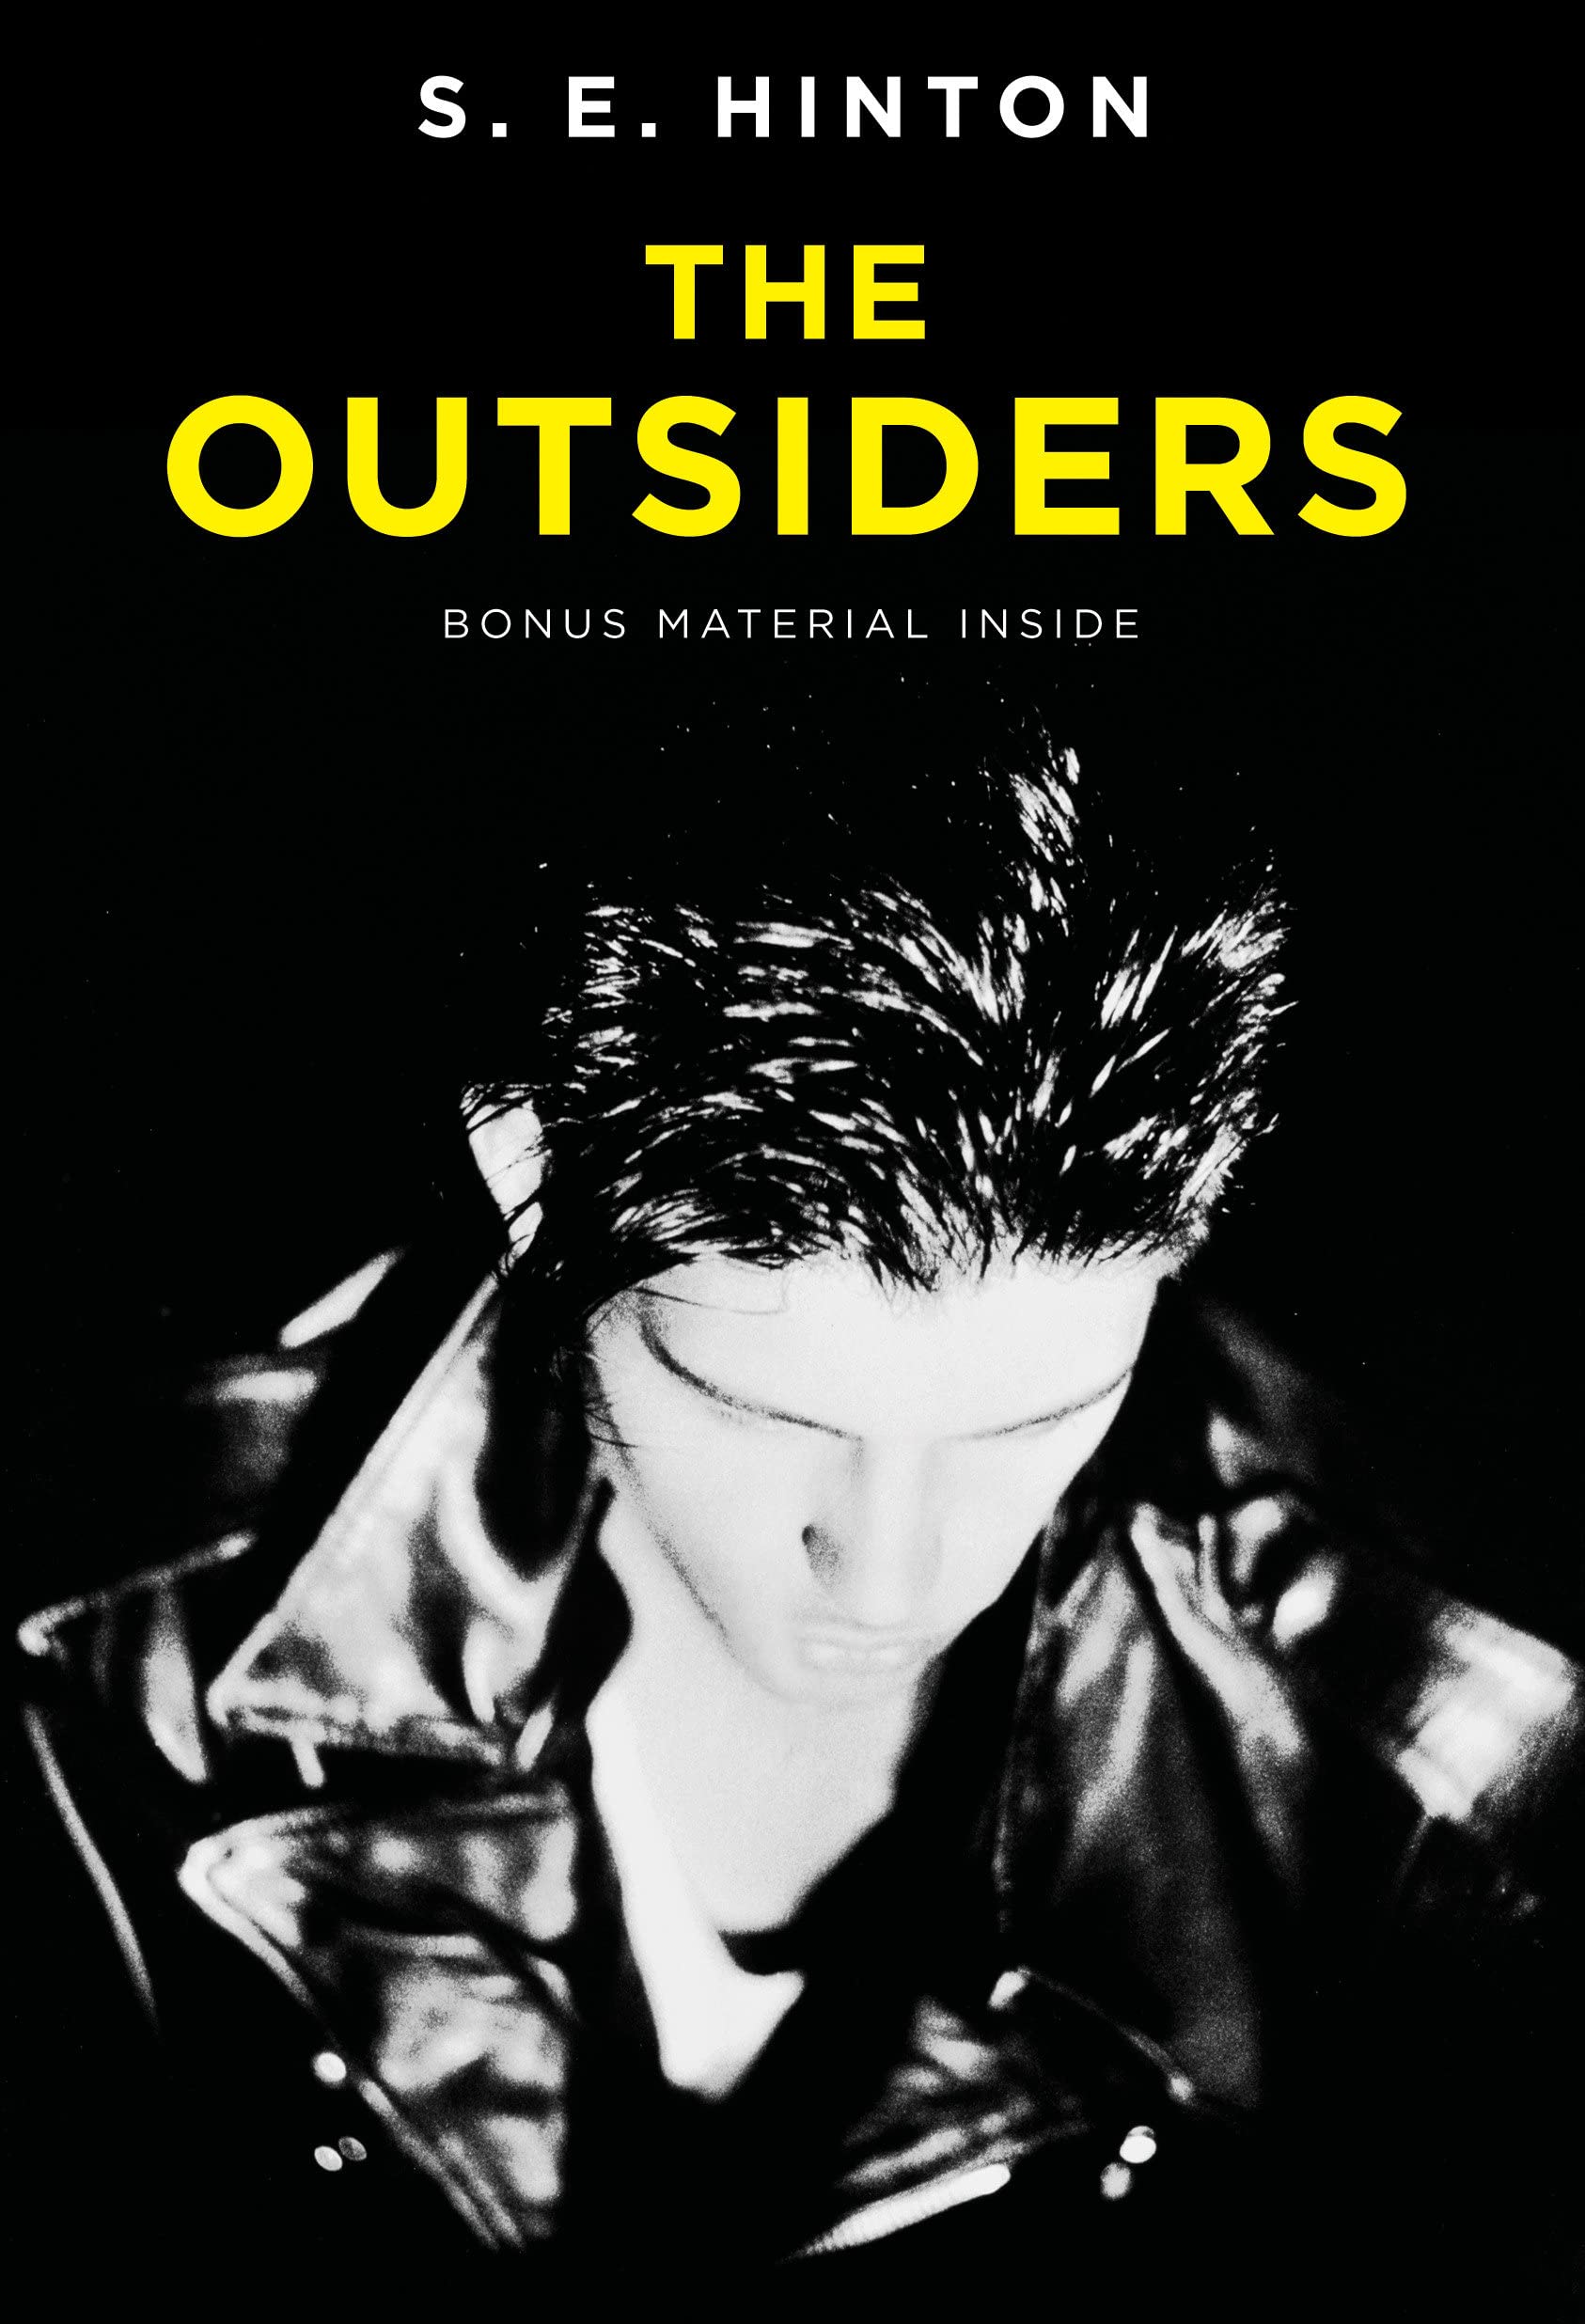 The Outsiders by S.E. Hinton - middle school books 